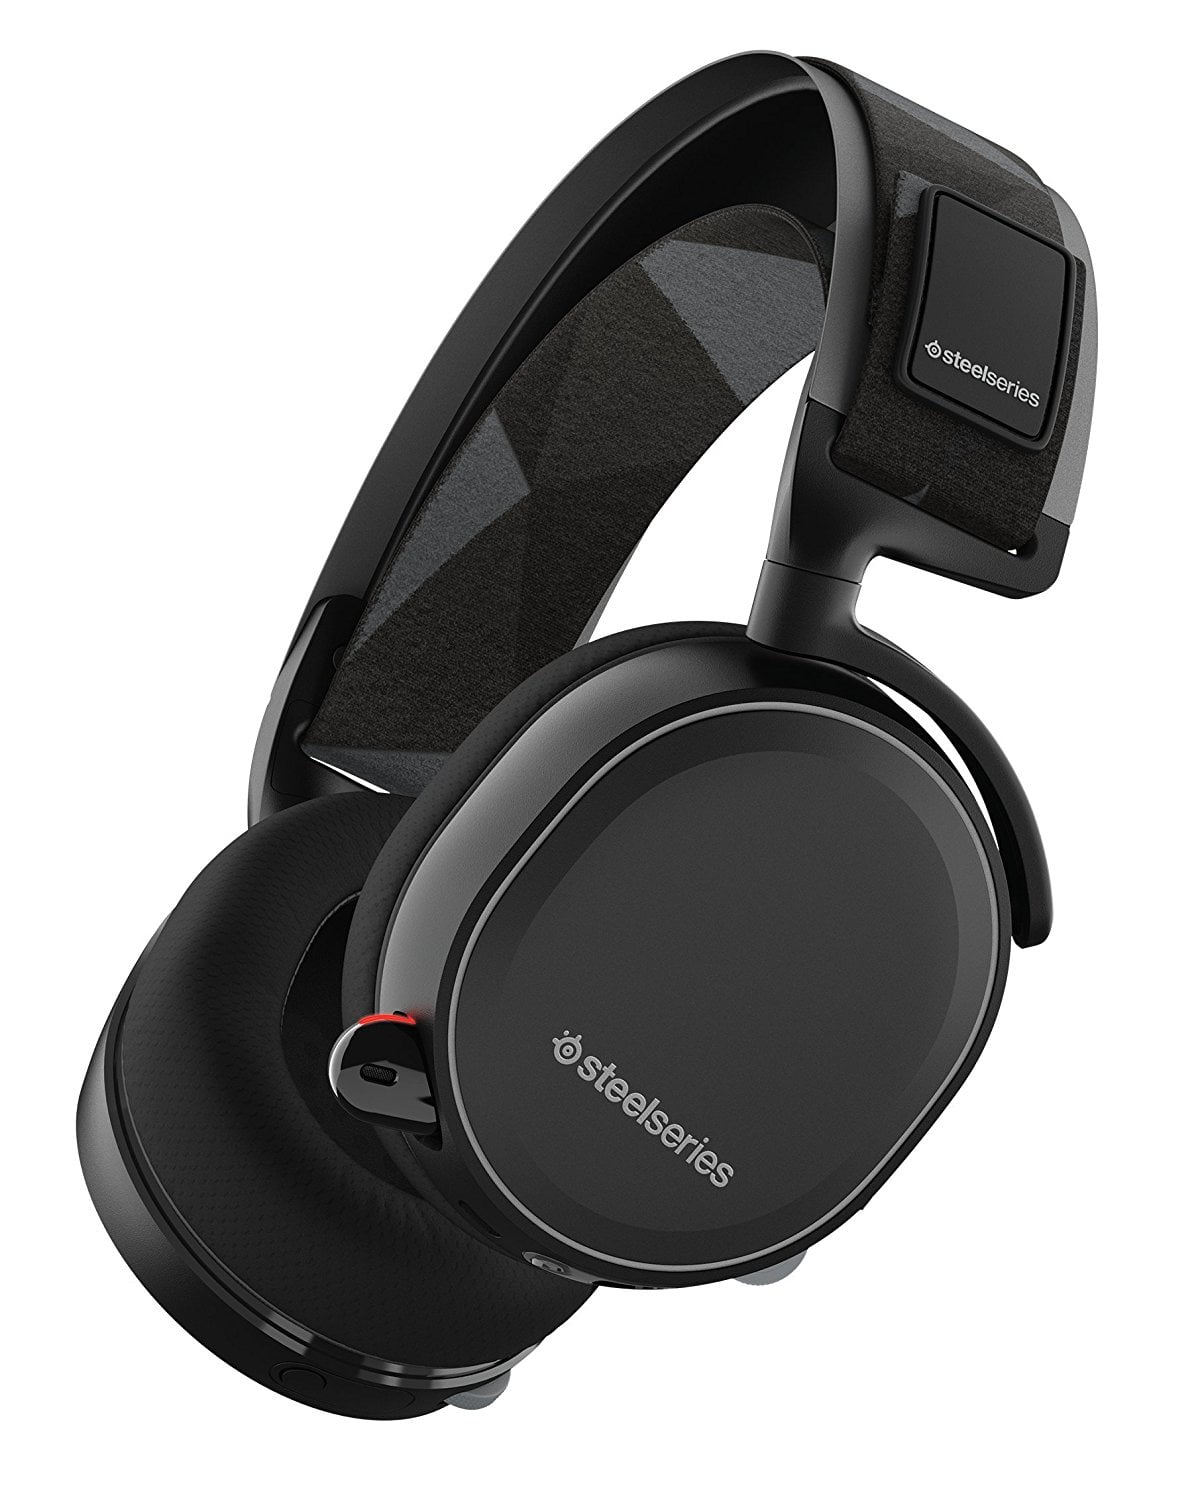 Restored SteelSeries Arctis 7 Wireless Gaming Headset with DTS Headphone:X 7.1 Surround for PC, PlayStation 4, VR, Mac and Wired for Xbox One, and iOS - Black (Refurbished) - Walmart.com